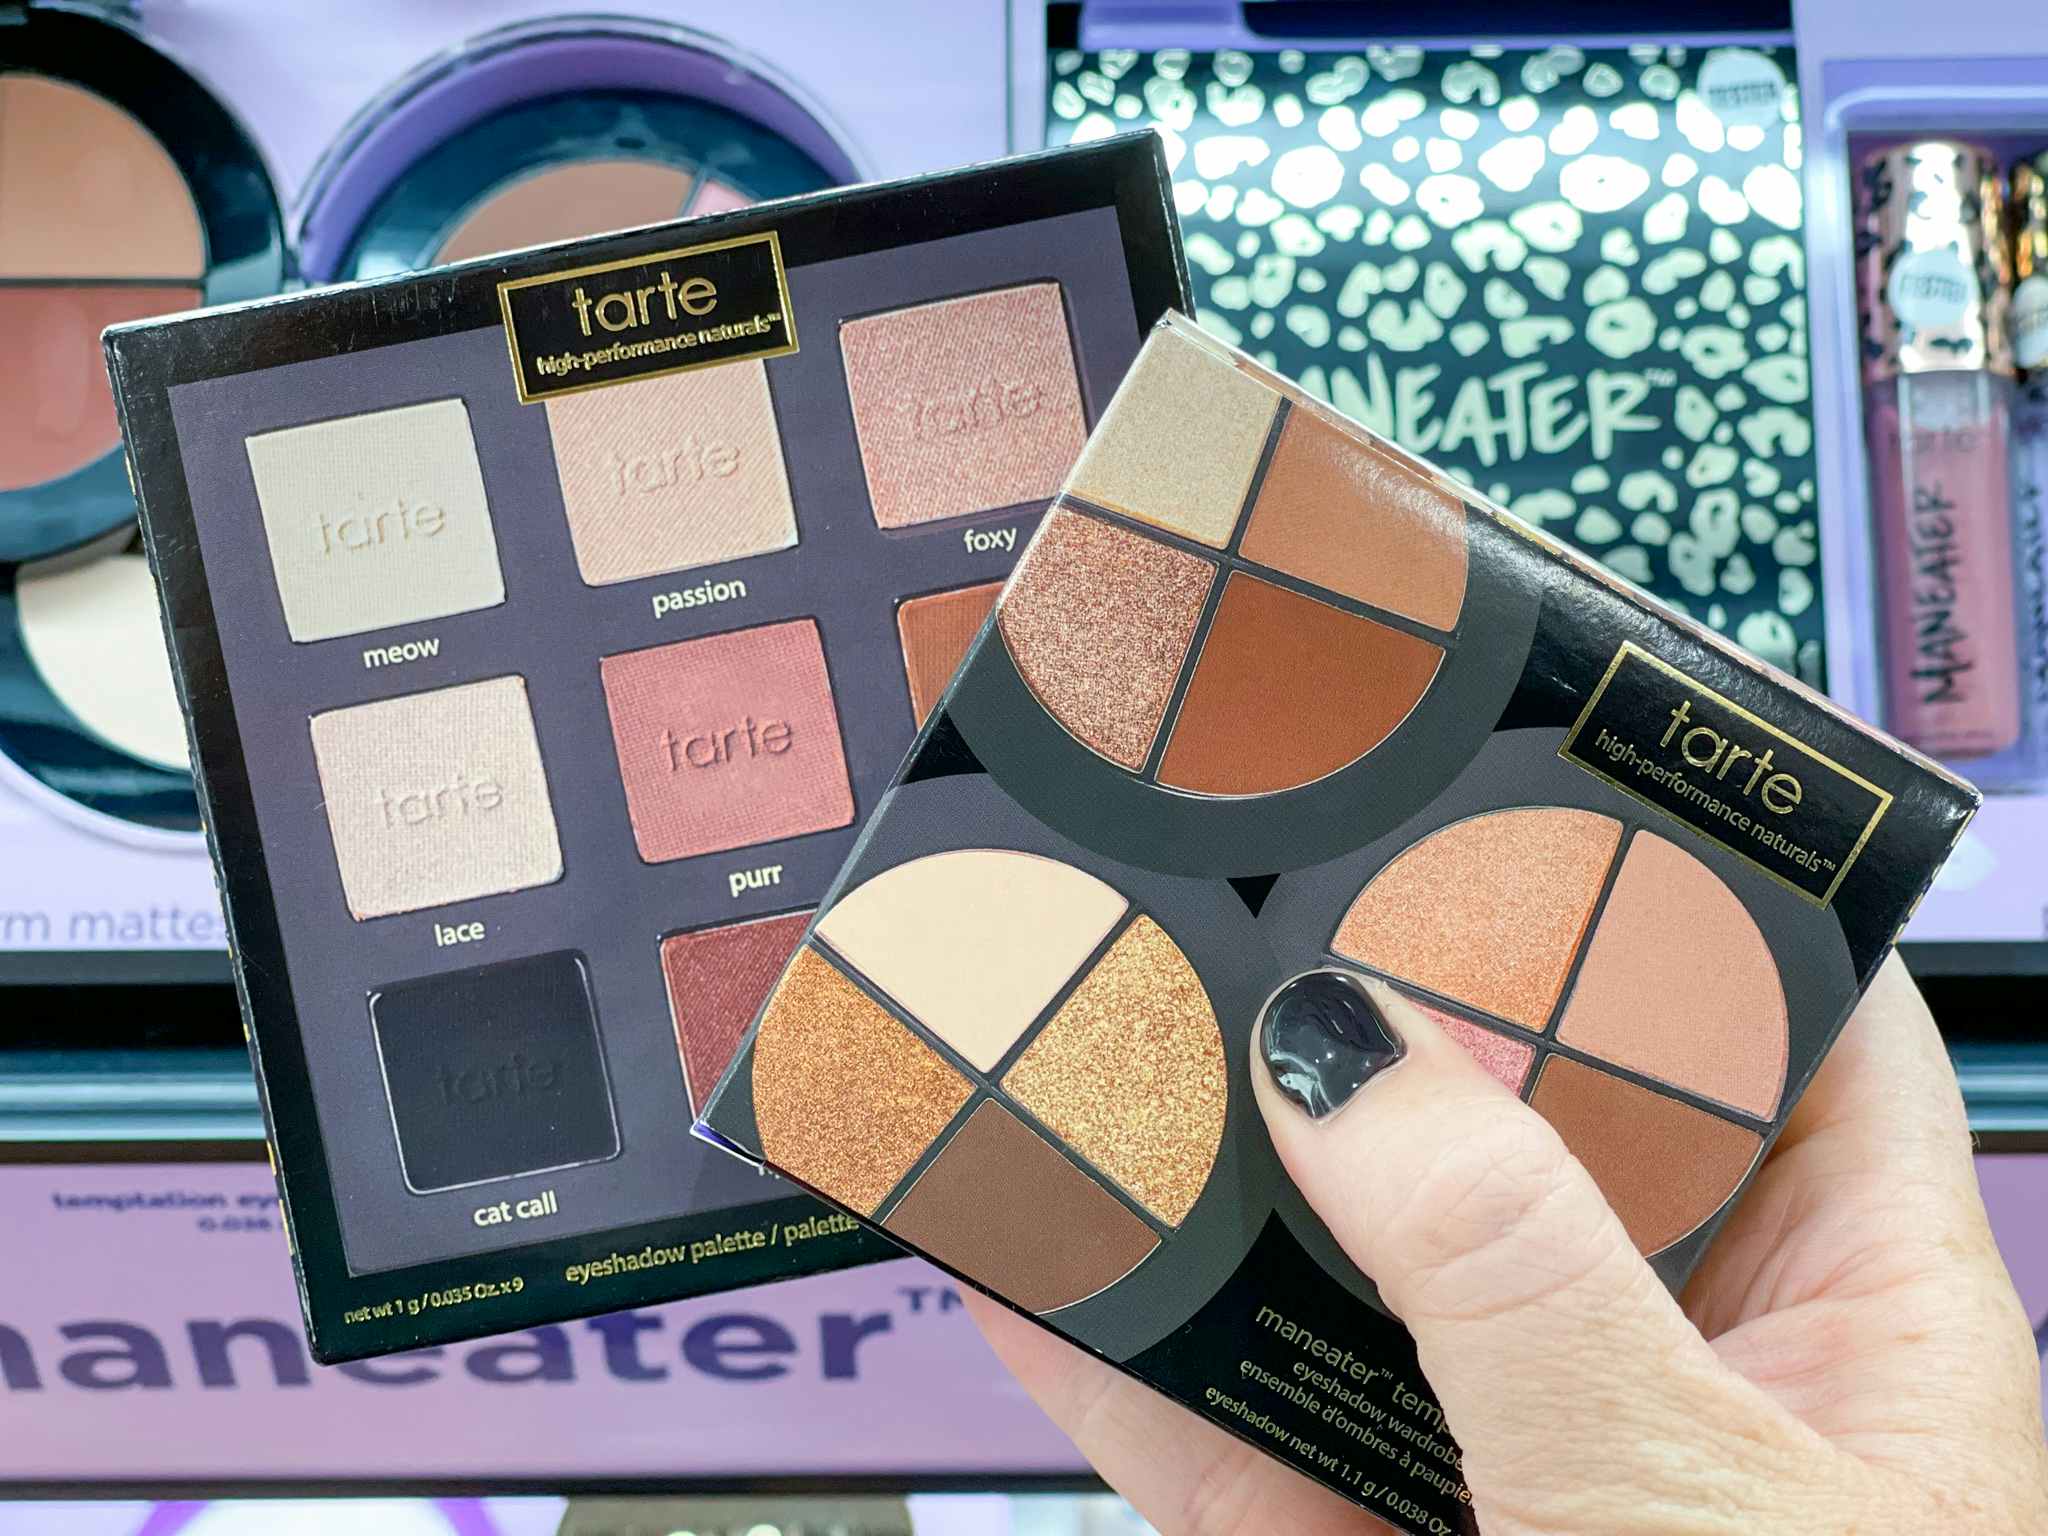 hand holding tarte eyeshadow palettes in front of a Tarte display.